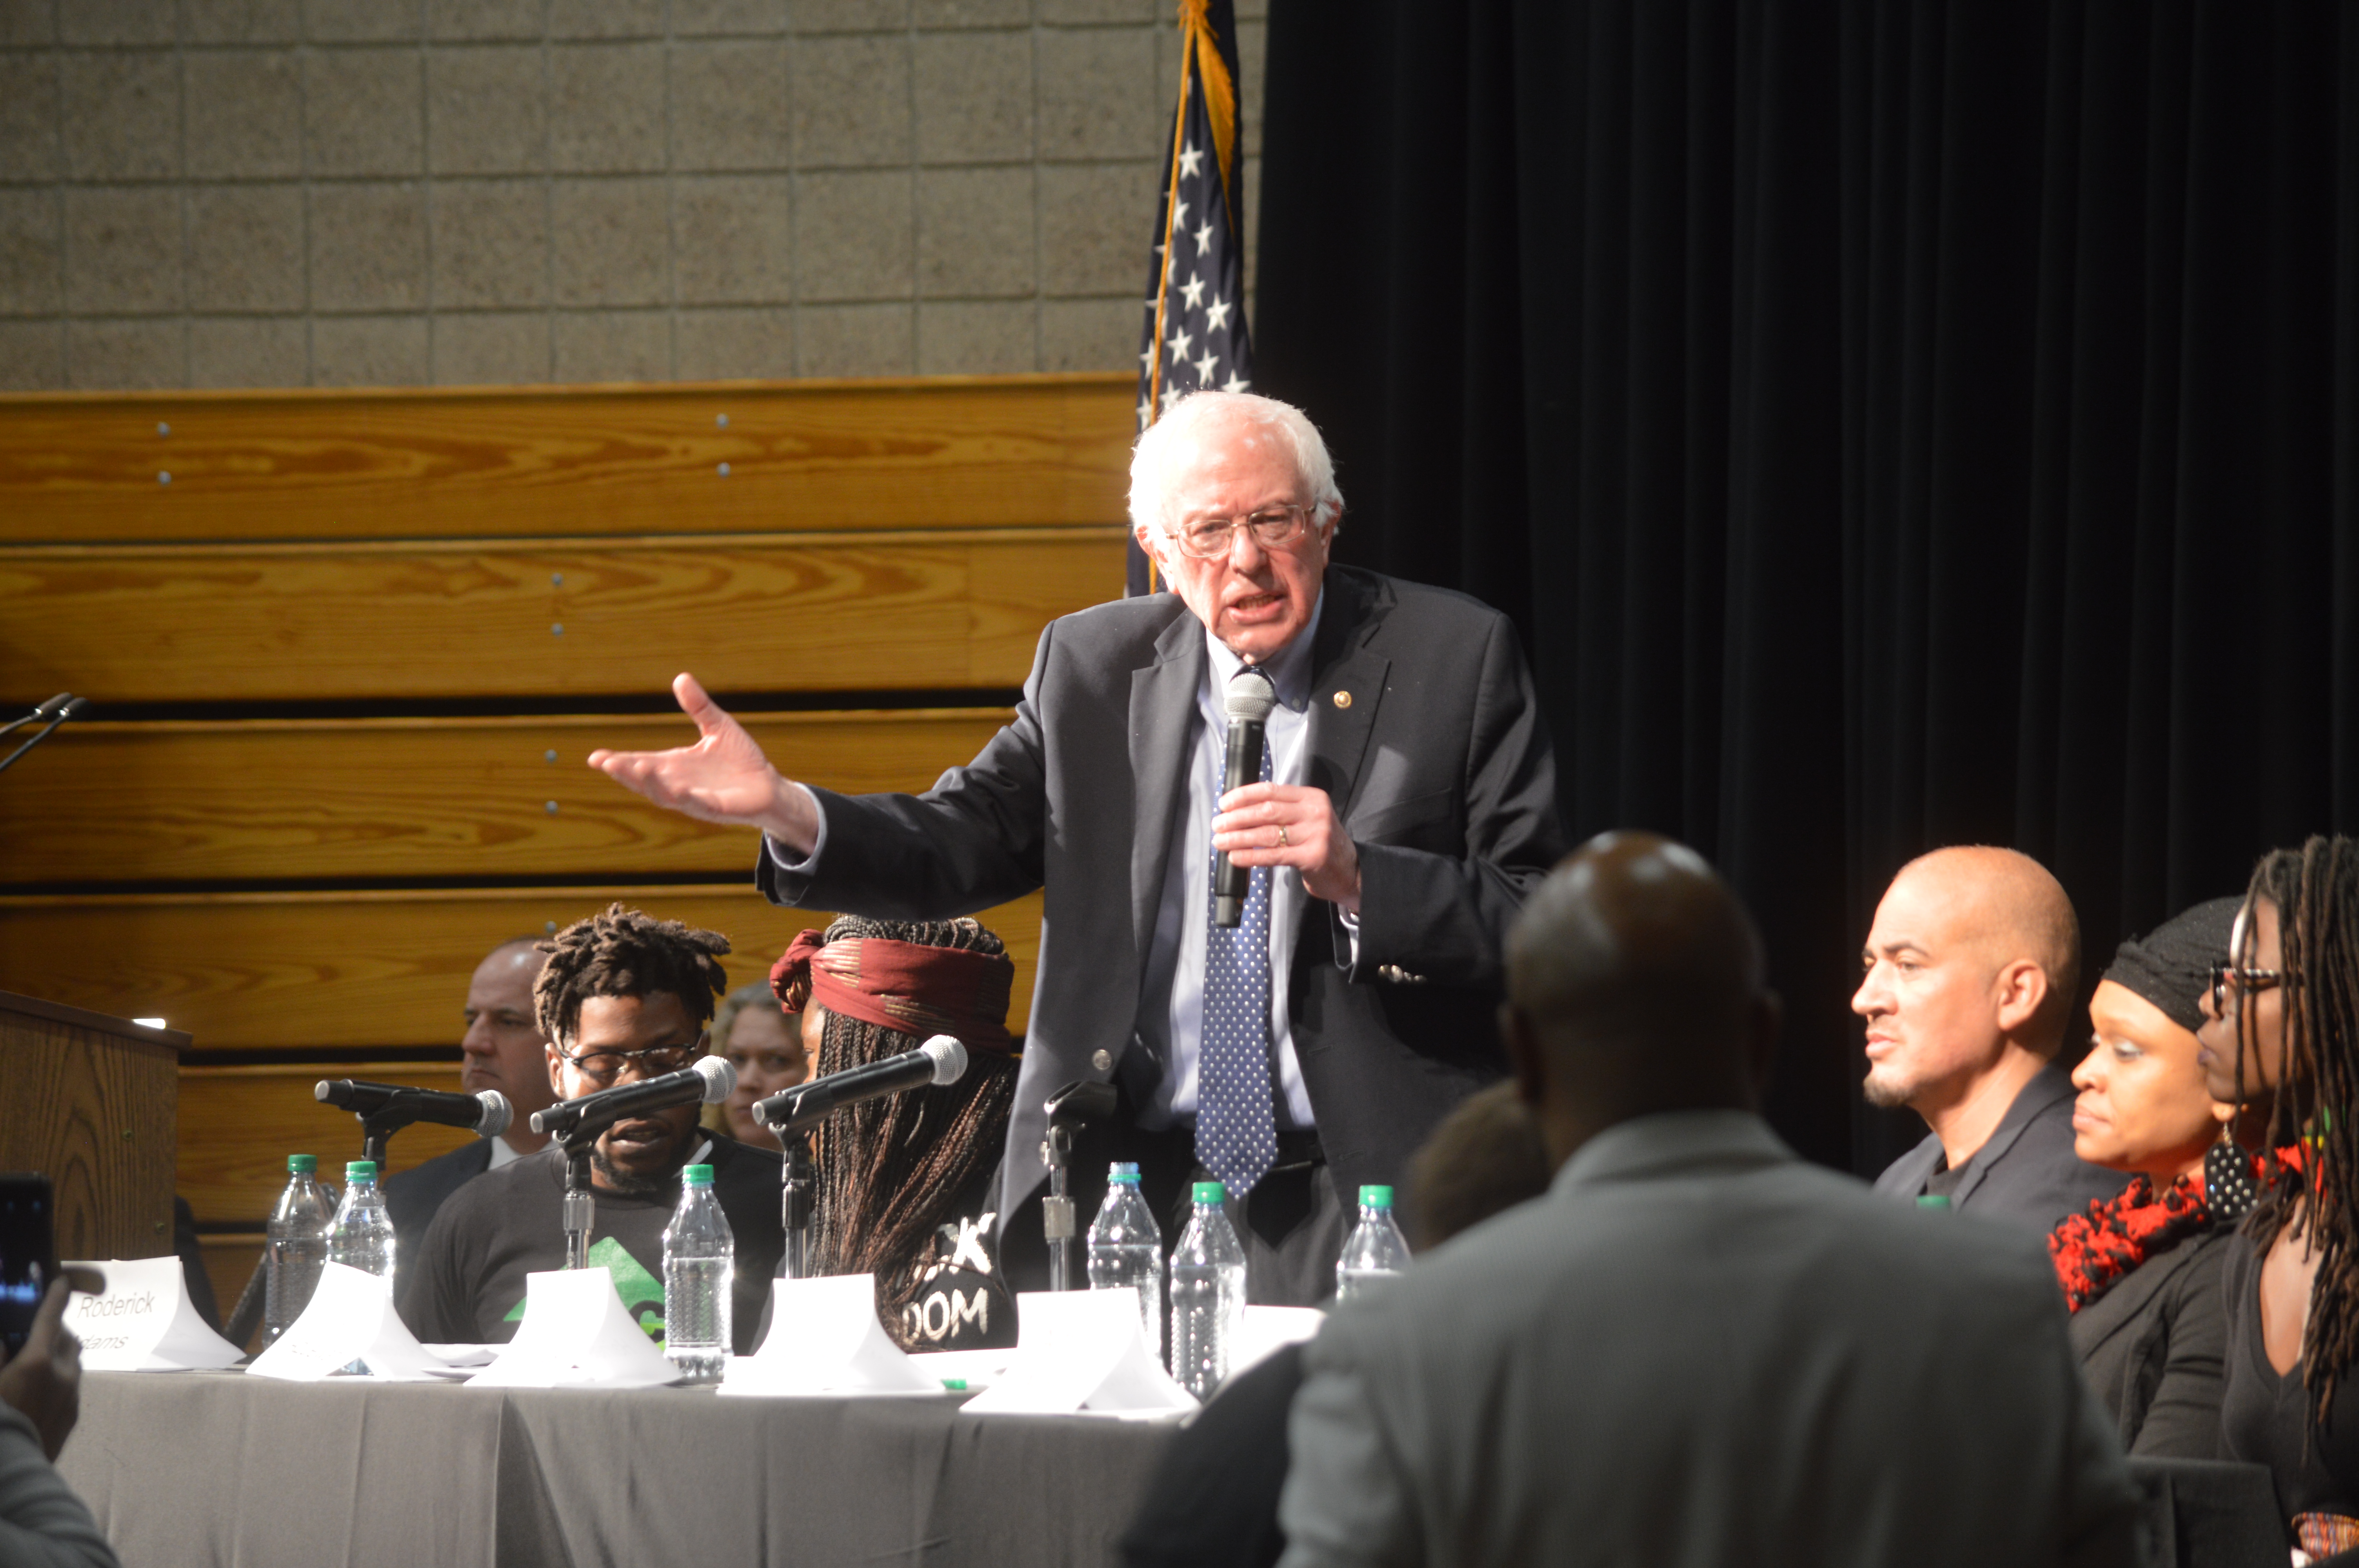 Bernie Sanders responds to a question at a forum for Black Americans